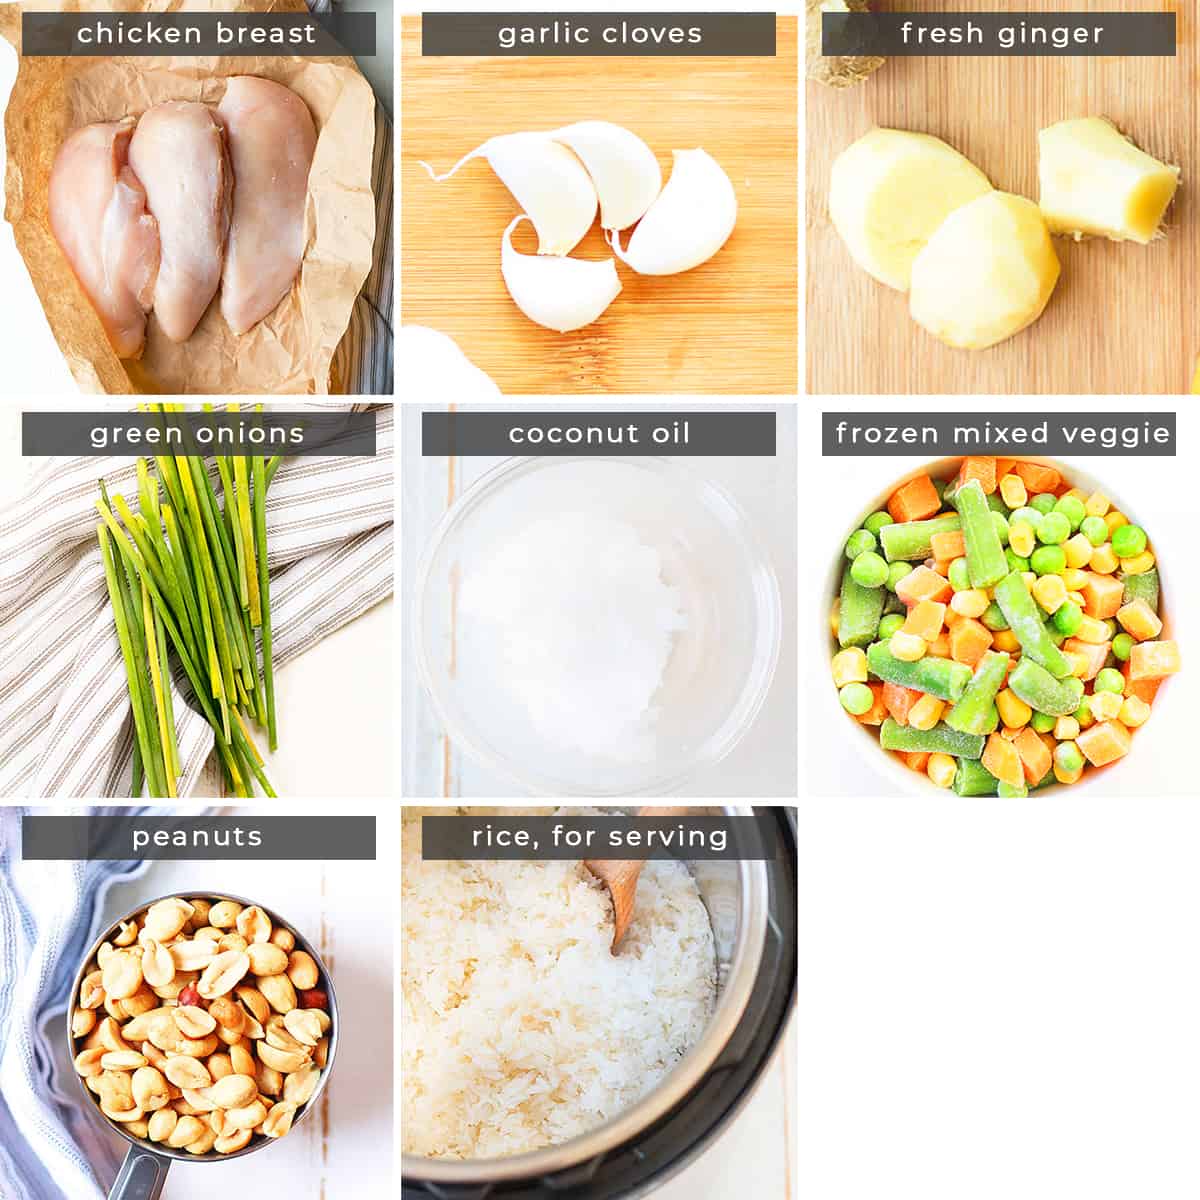 Image containing recipe ingredients: chicken breast, garlic cloves, fresh ginger, green onions, coconut oil, frozen mixed vegetables, peanuts, and rice. 